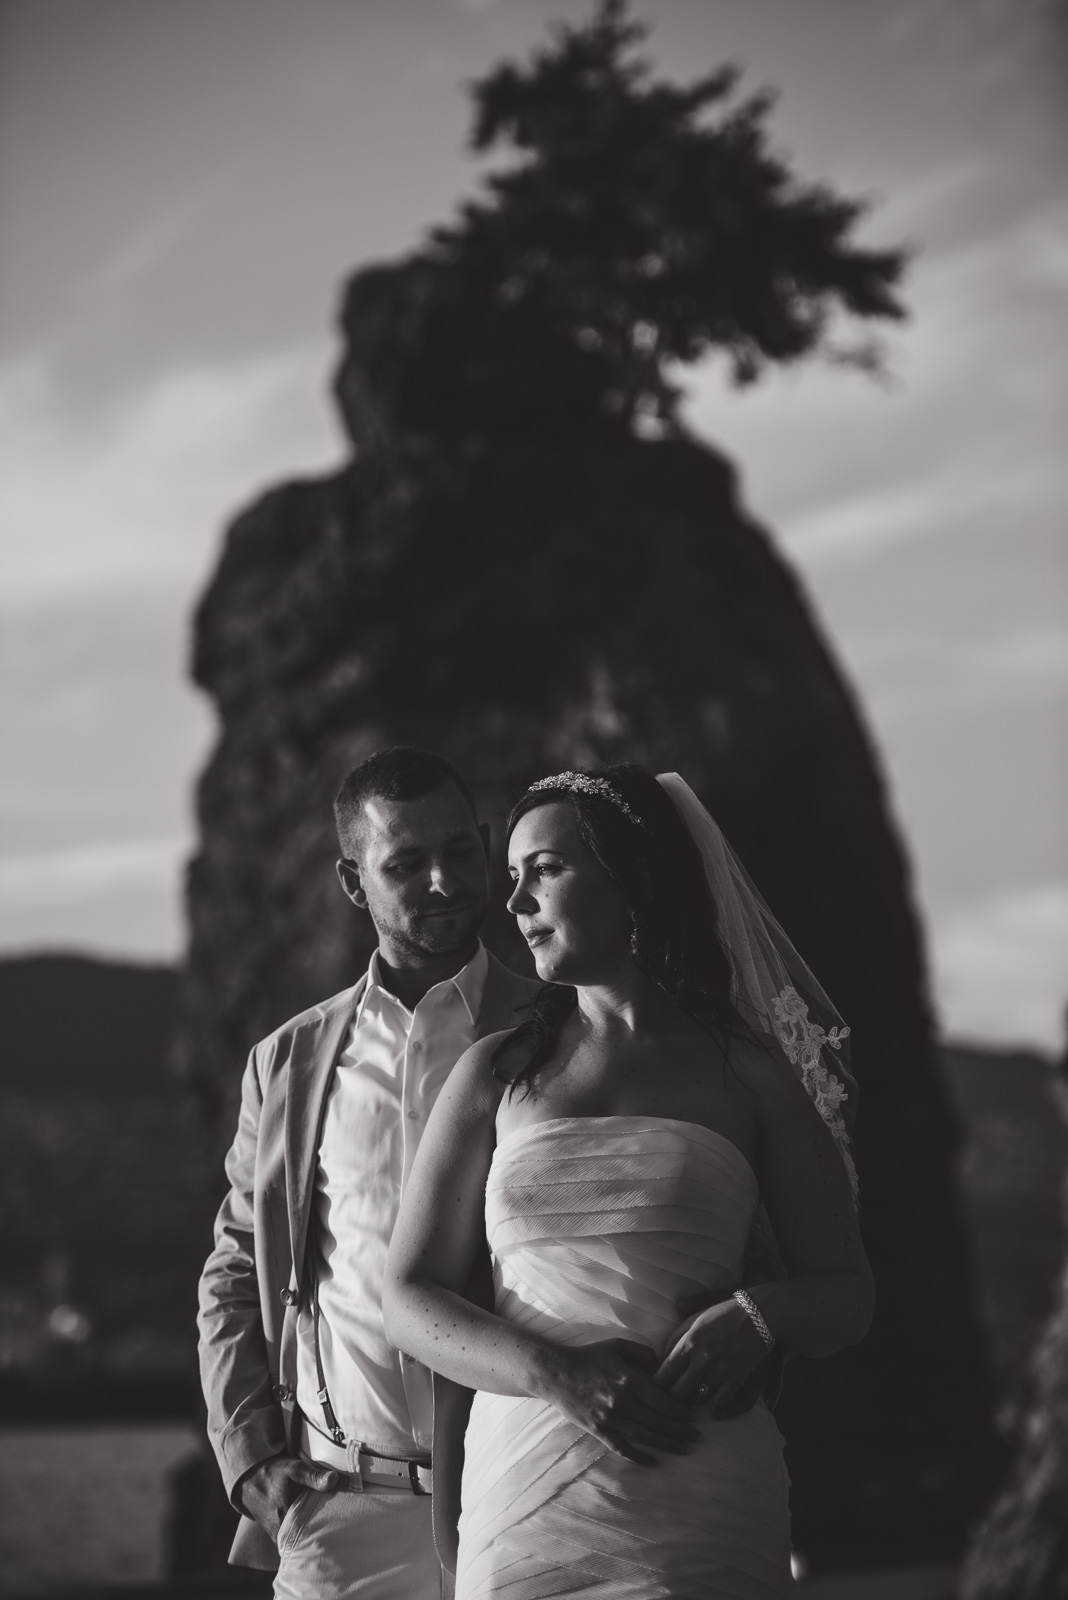   ^ Anton and Natasha got married in Mexico, but contacted me with the hopes of having a portrait session done here in Vancouver with some of the well-known Vancouver landmarks. &nbsp;Sometimes shoots like these can be particularly challenging, as th